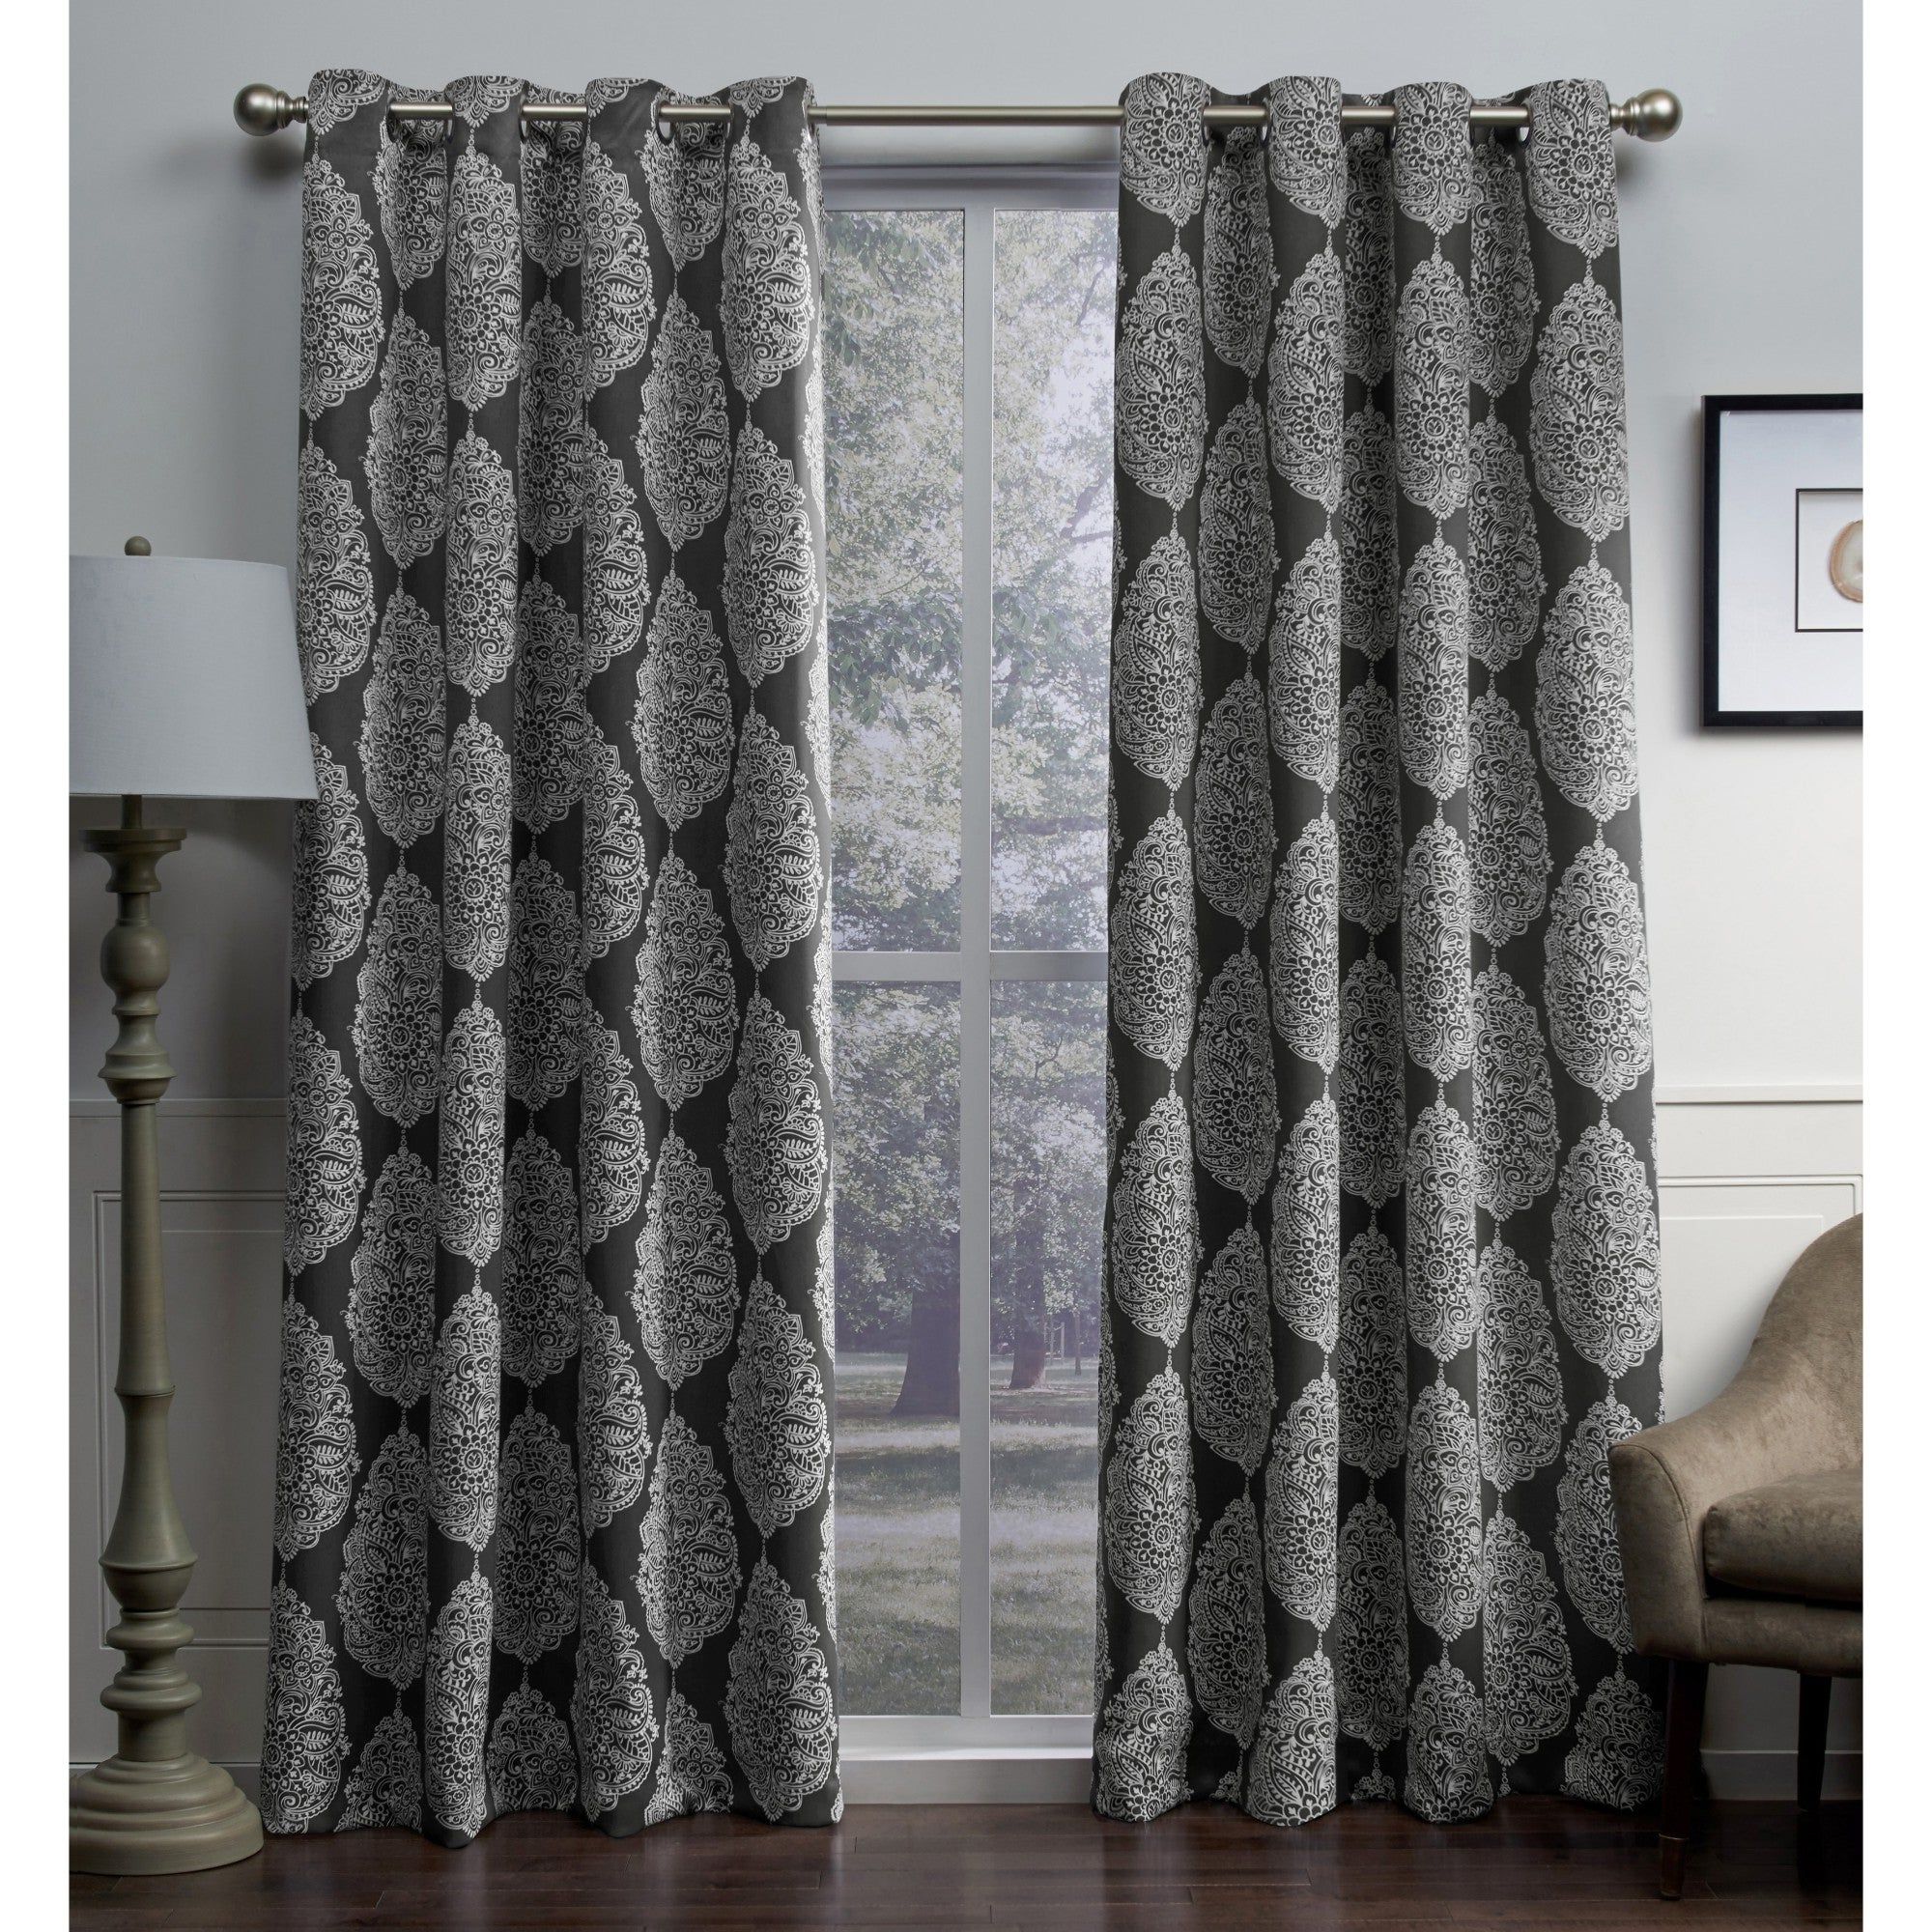 Recent Oxford Sateen Woven Blackout Grommet Top Curtain Panel Pairs With Details About Ati Home Queensland Sateen Blackout Grommet Top Curtain (View 15 of 20)